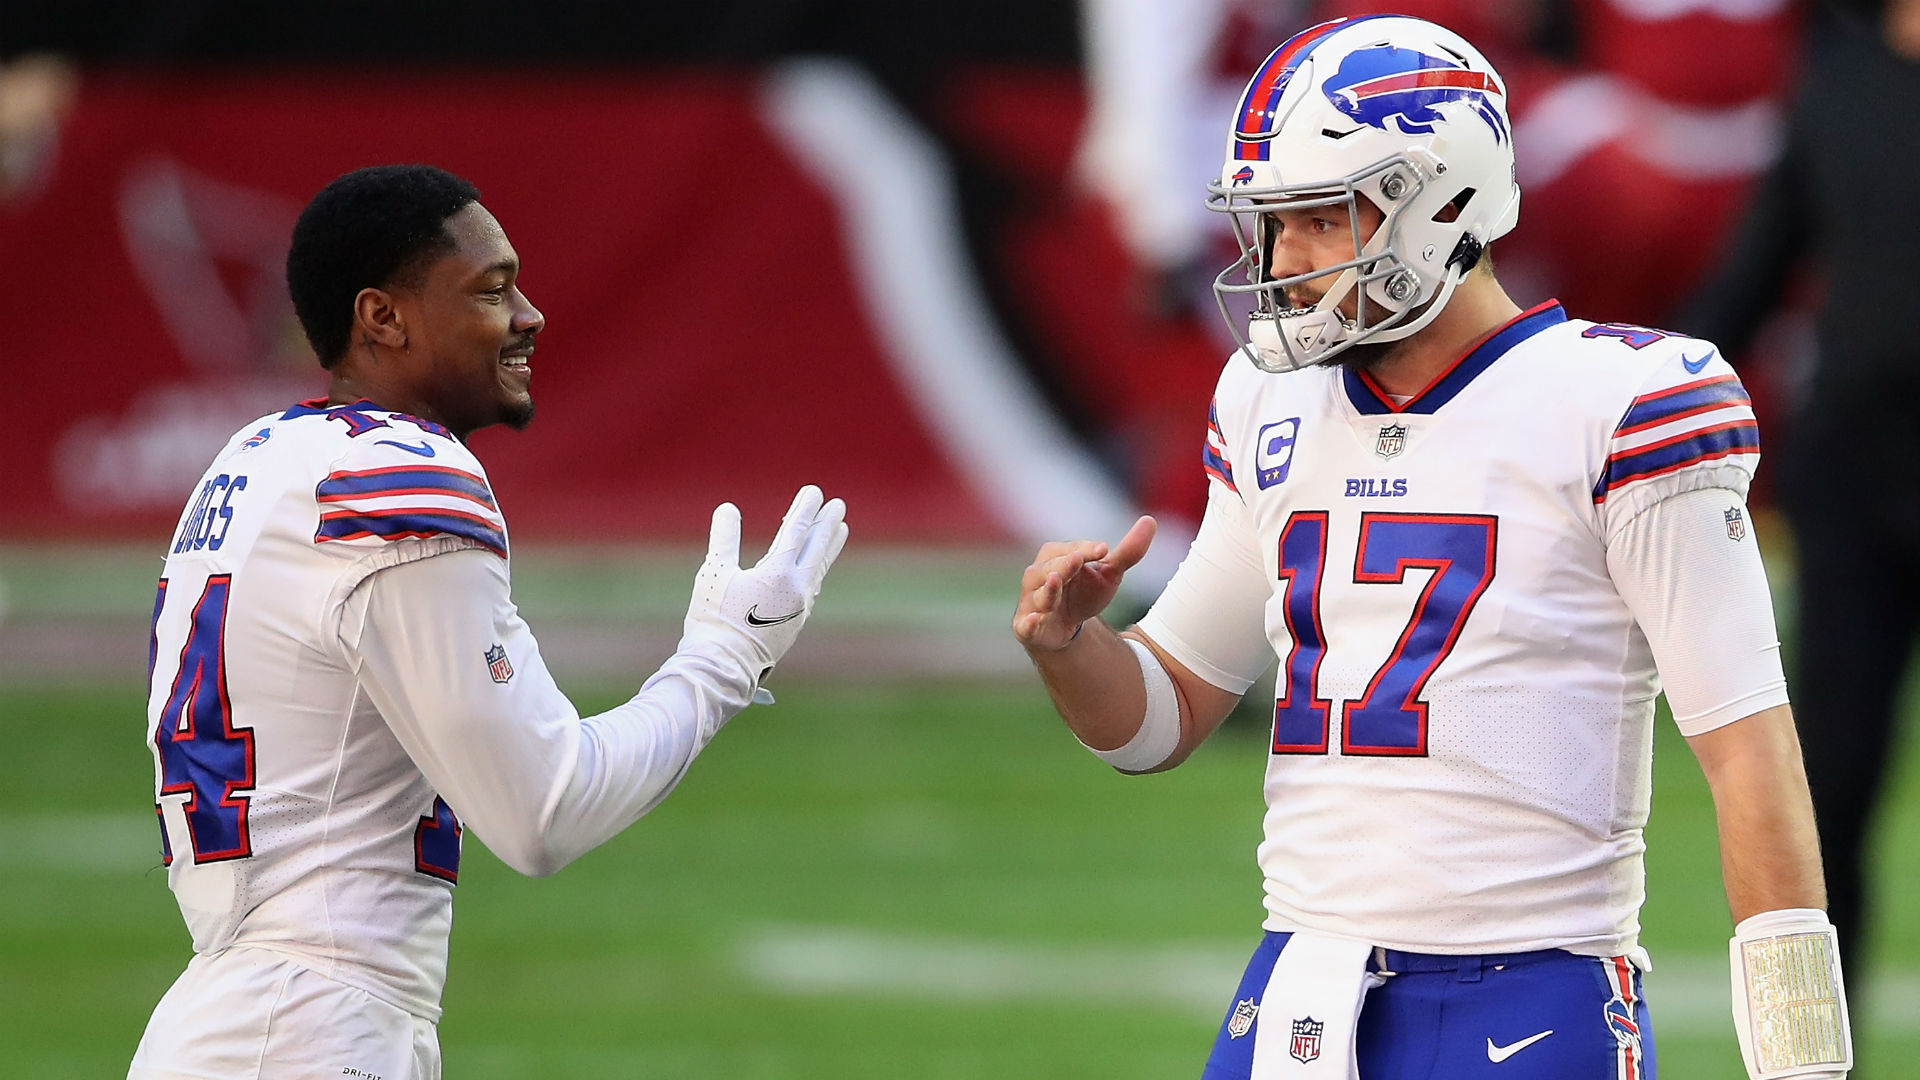 The Bills' Stefon Diggs trade gave Josh Allen exactly what he needed to thrive